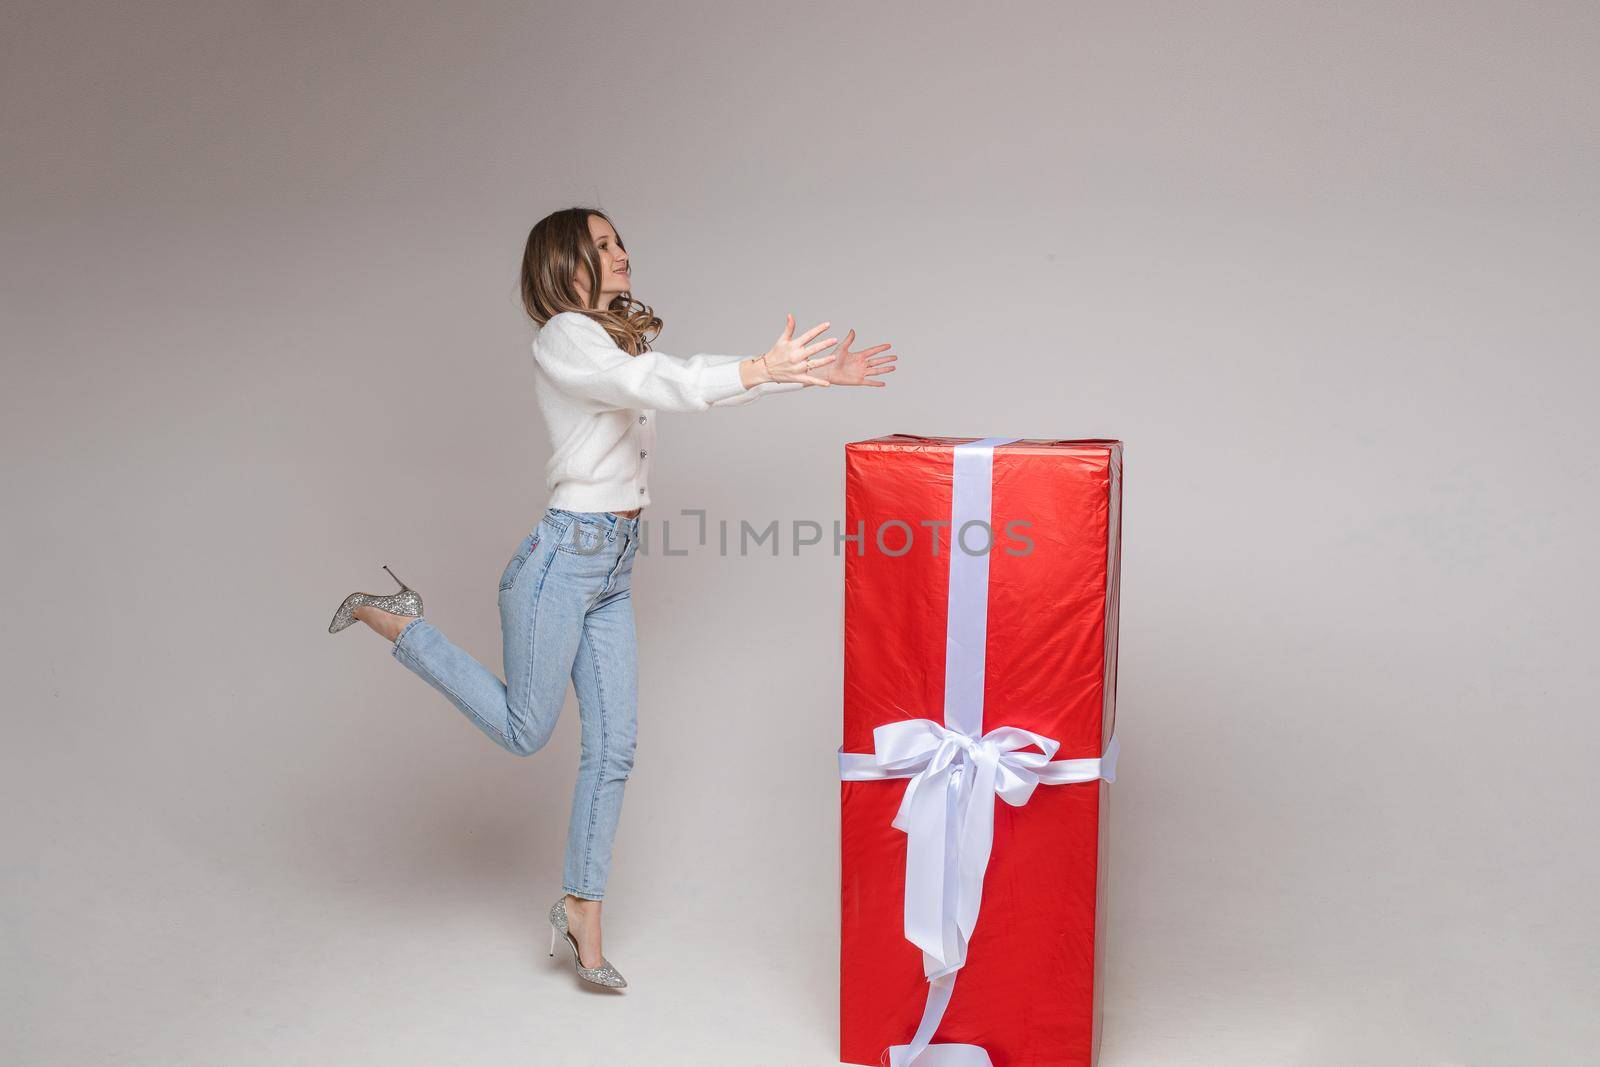 Full length stock photo of cheerful jumping girl in heels with outstretched arms with giant gift in red paper with white bow on white background.